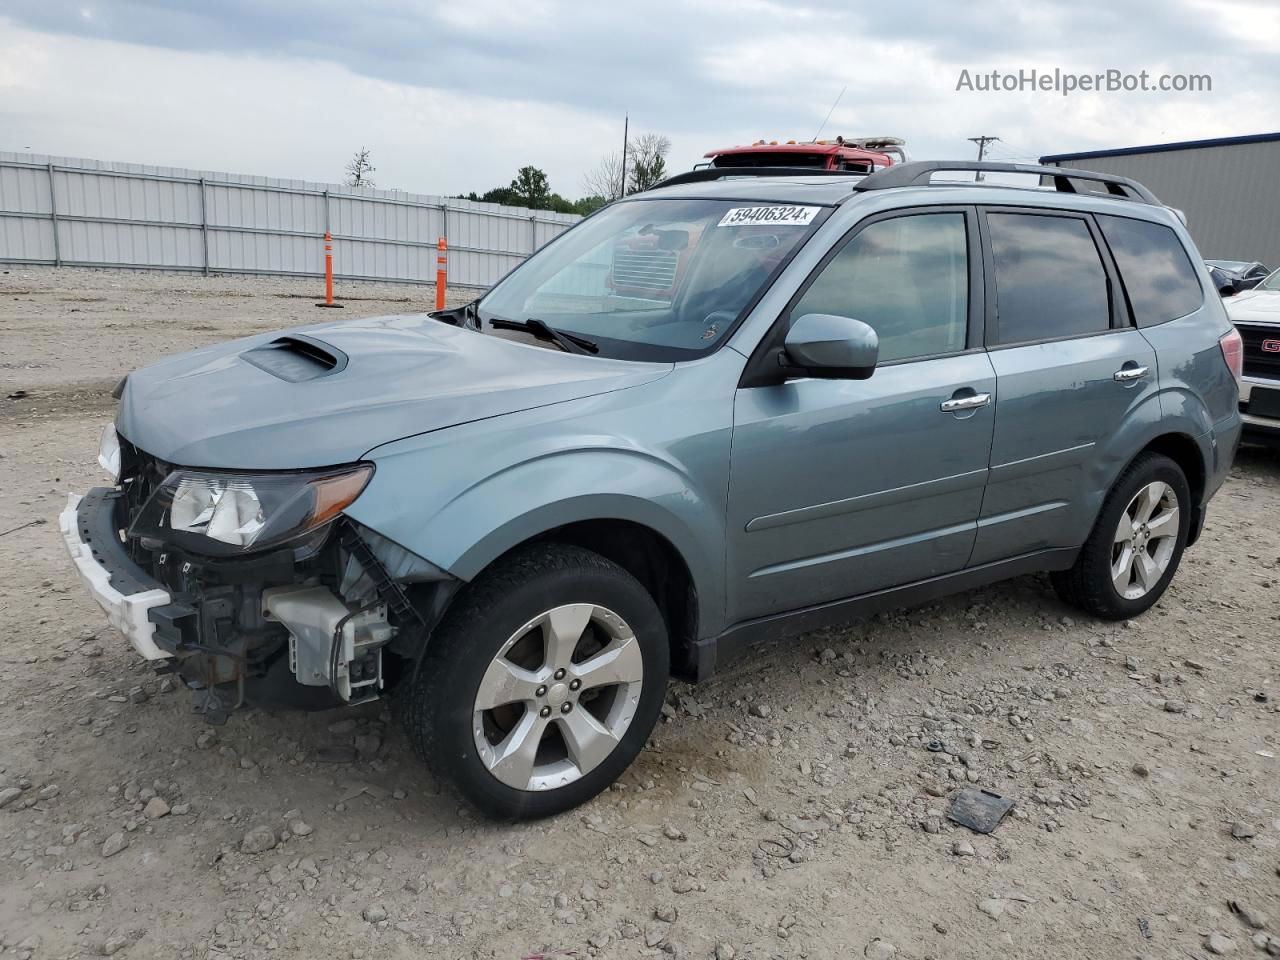 2009 Subaru Forester 2.5xt Limited Teal vin: JF2SH66619H749549